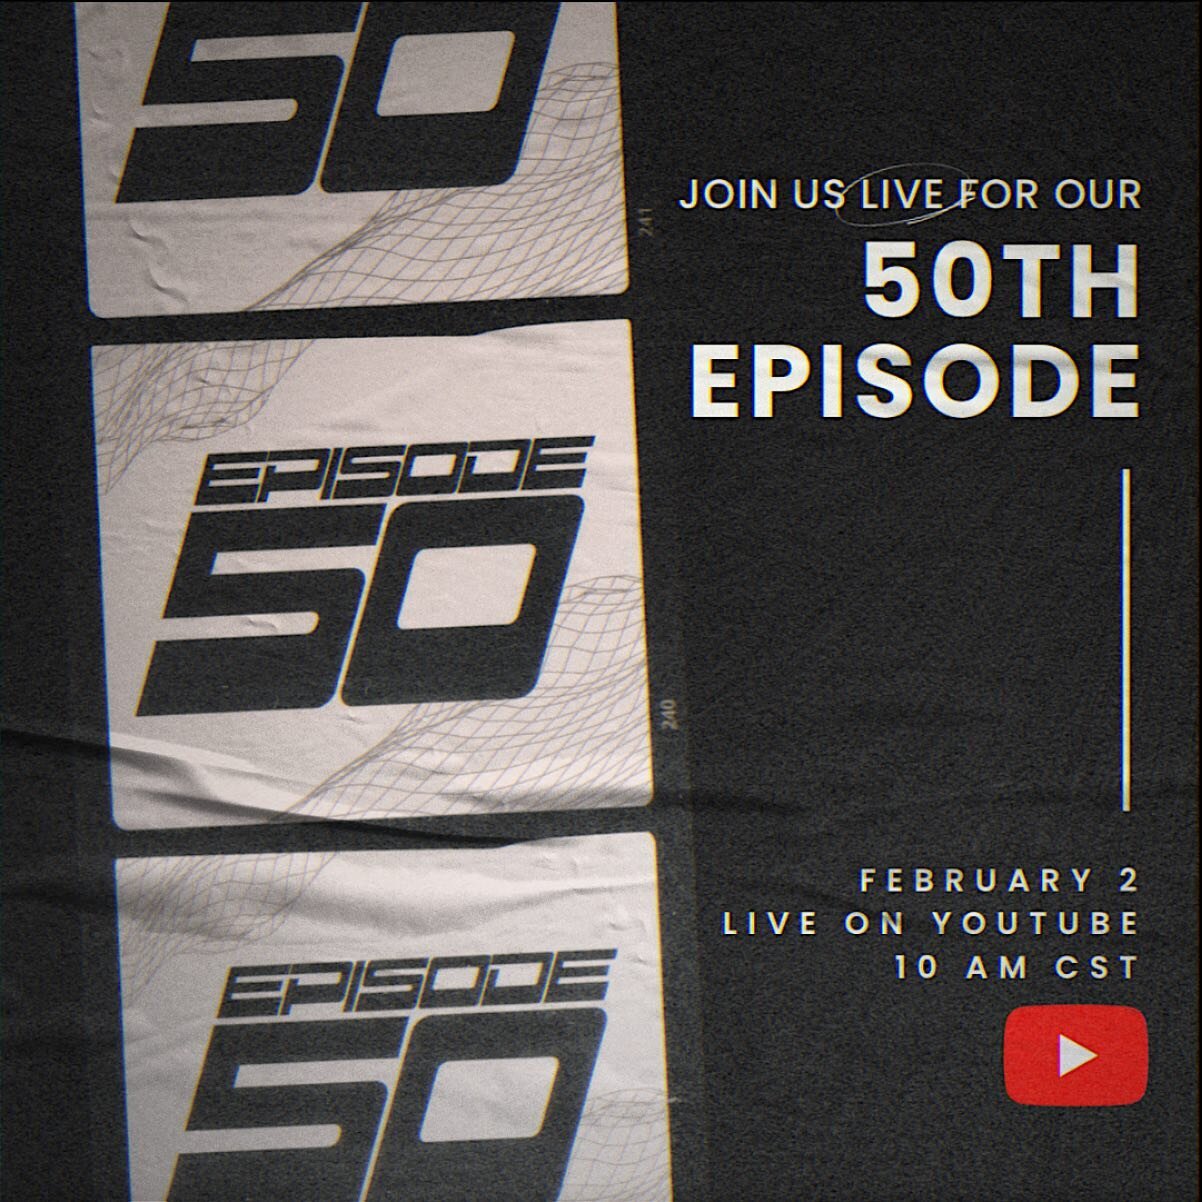 TFH FAMILY 🖤

We have some exciting news! Tomorrow we are going LIVE on YouTube for our 50th episode. We can&rsquo;t begin to explain how excited we are to engage with you! Feel free to submit any questions ahead of time on the website. The links fo